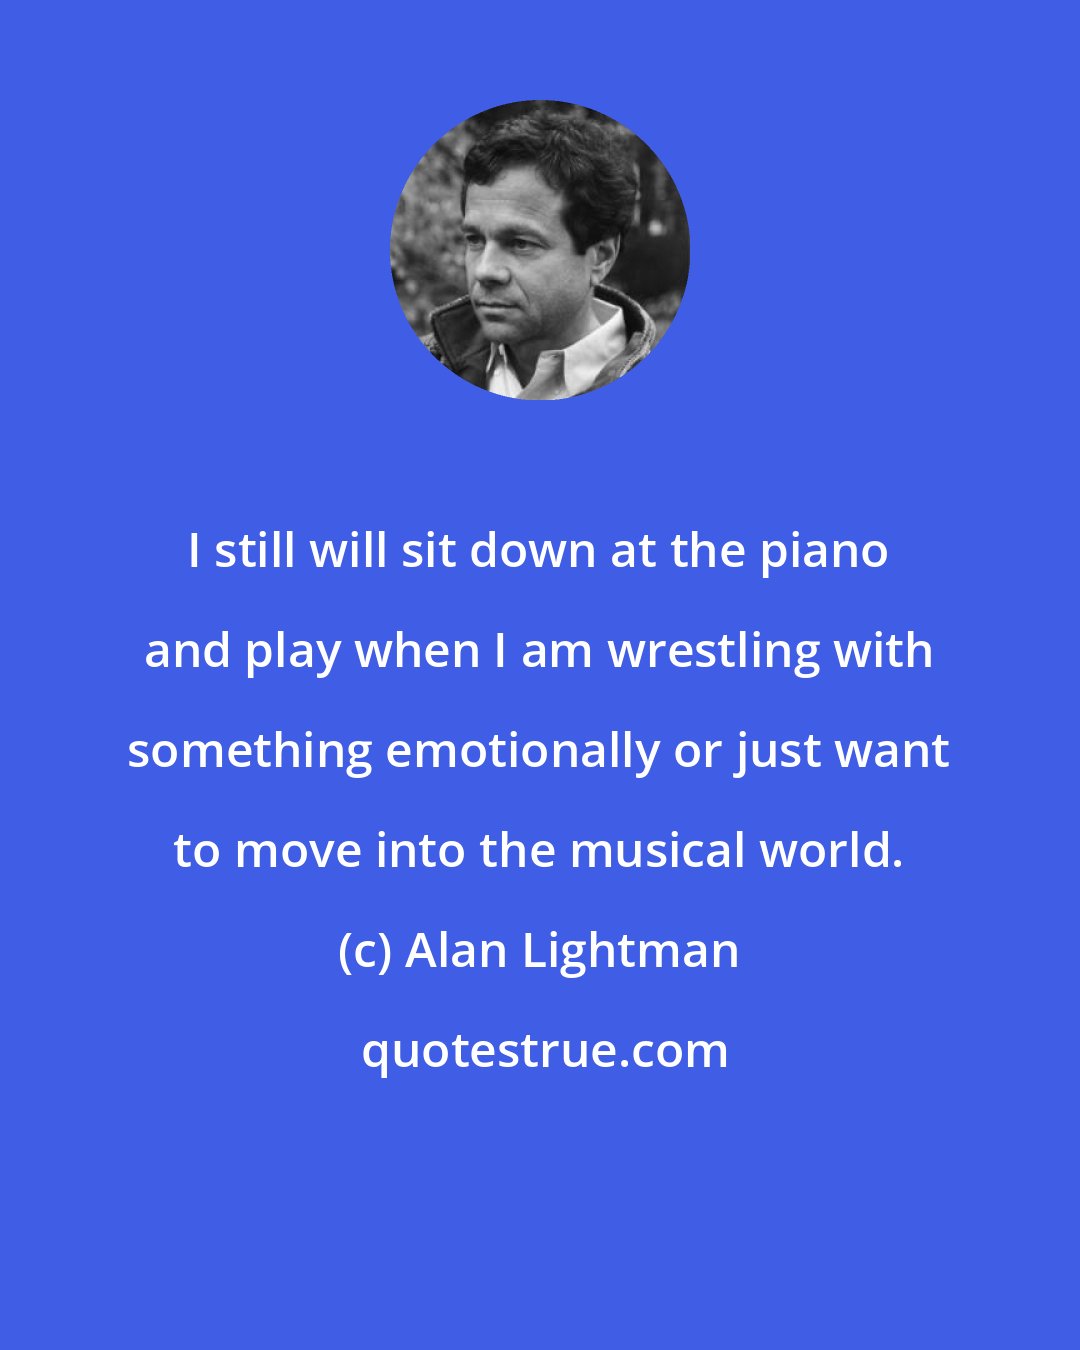 Alan Lightman: I still will sit down at the piano and play when I am wrestling with something emotionally or just want to move into the musical world.